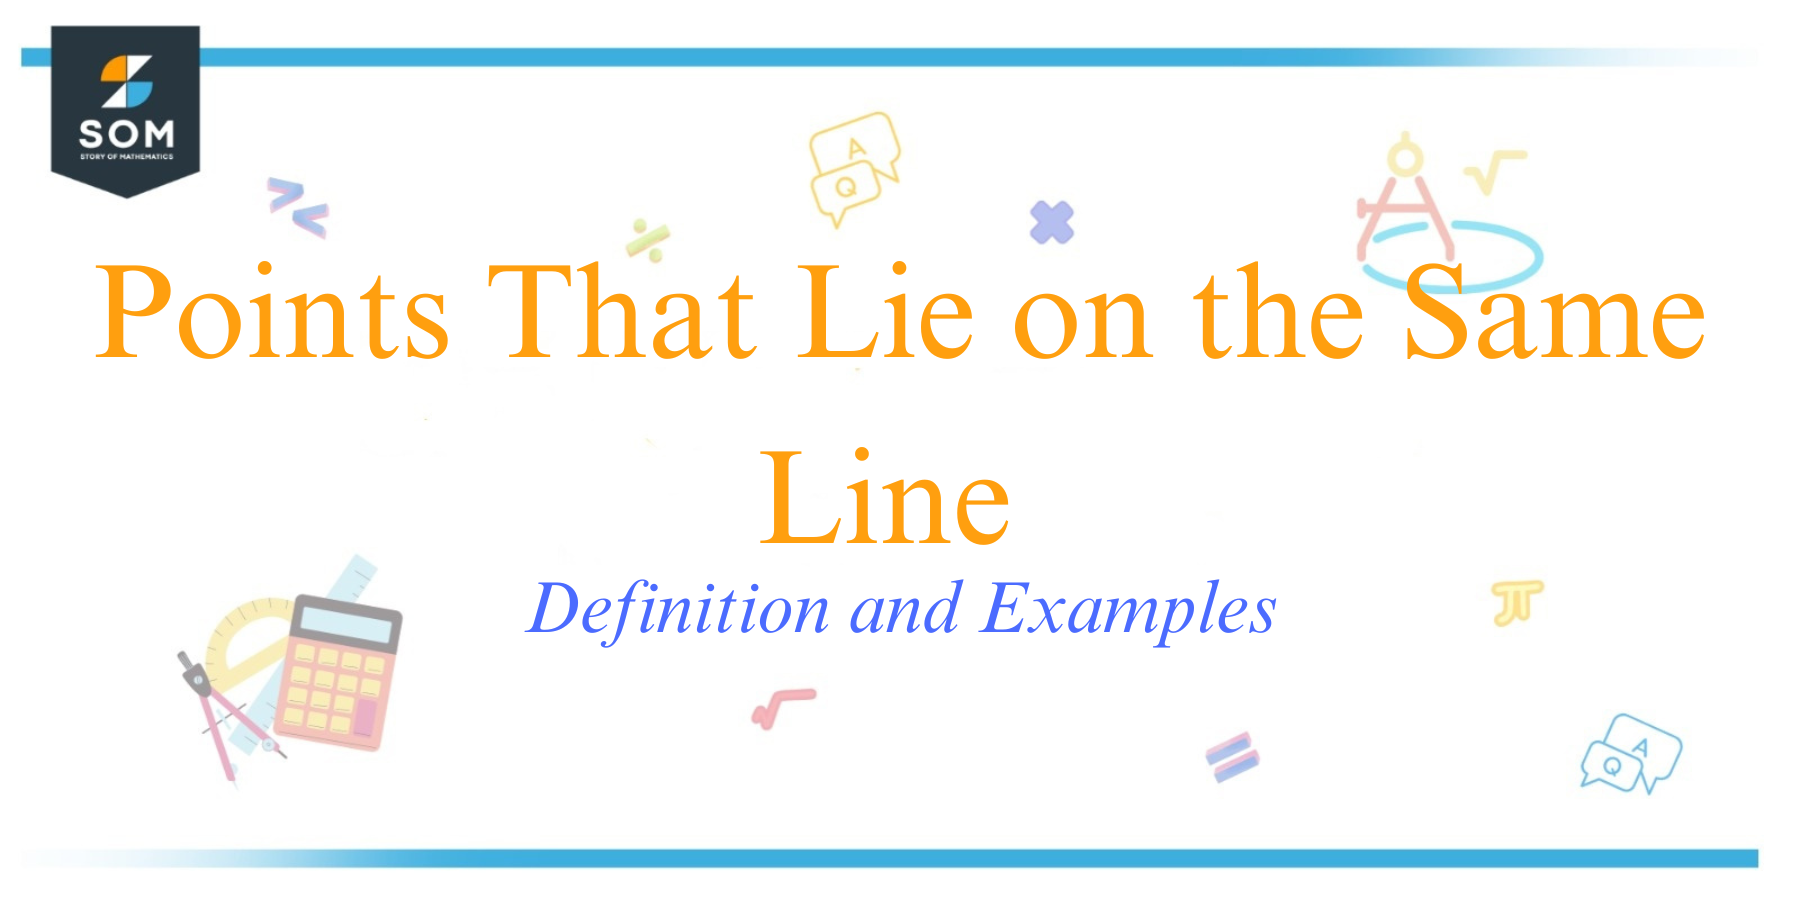 Points That Lie on the Same Line Definition and Examples 1